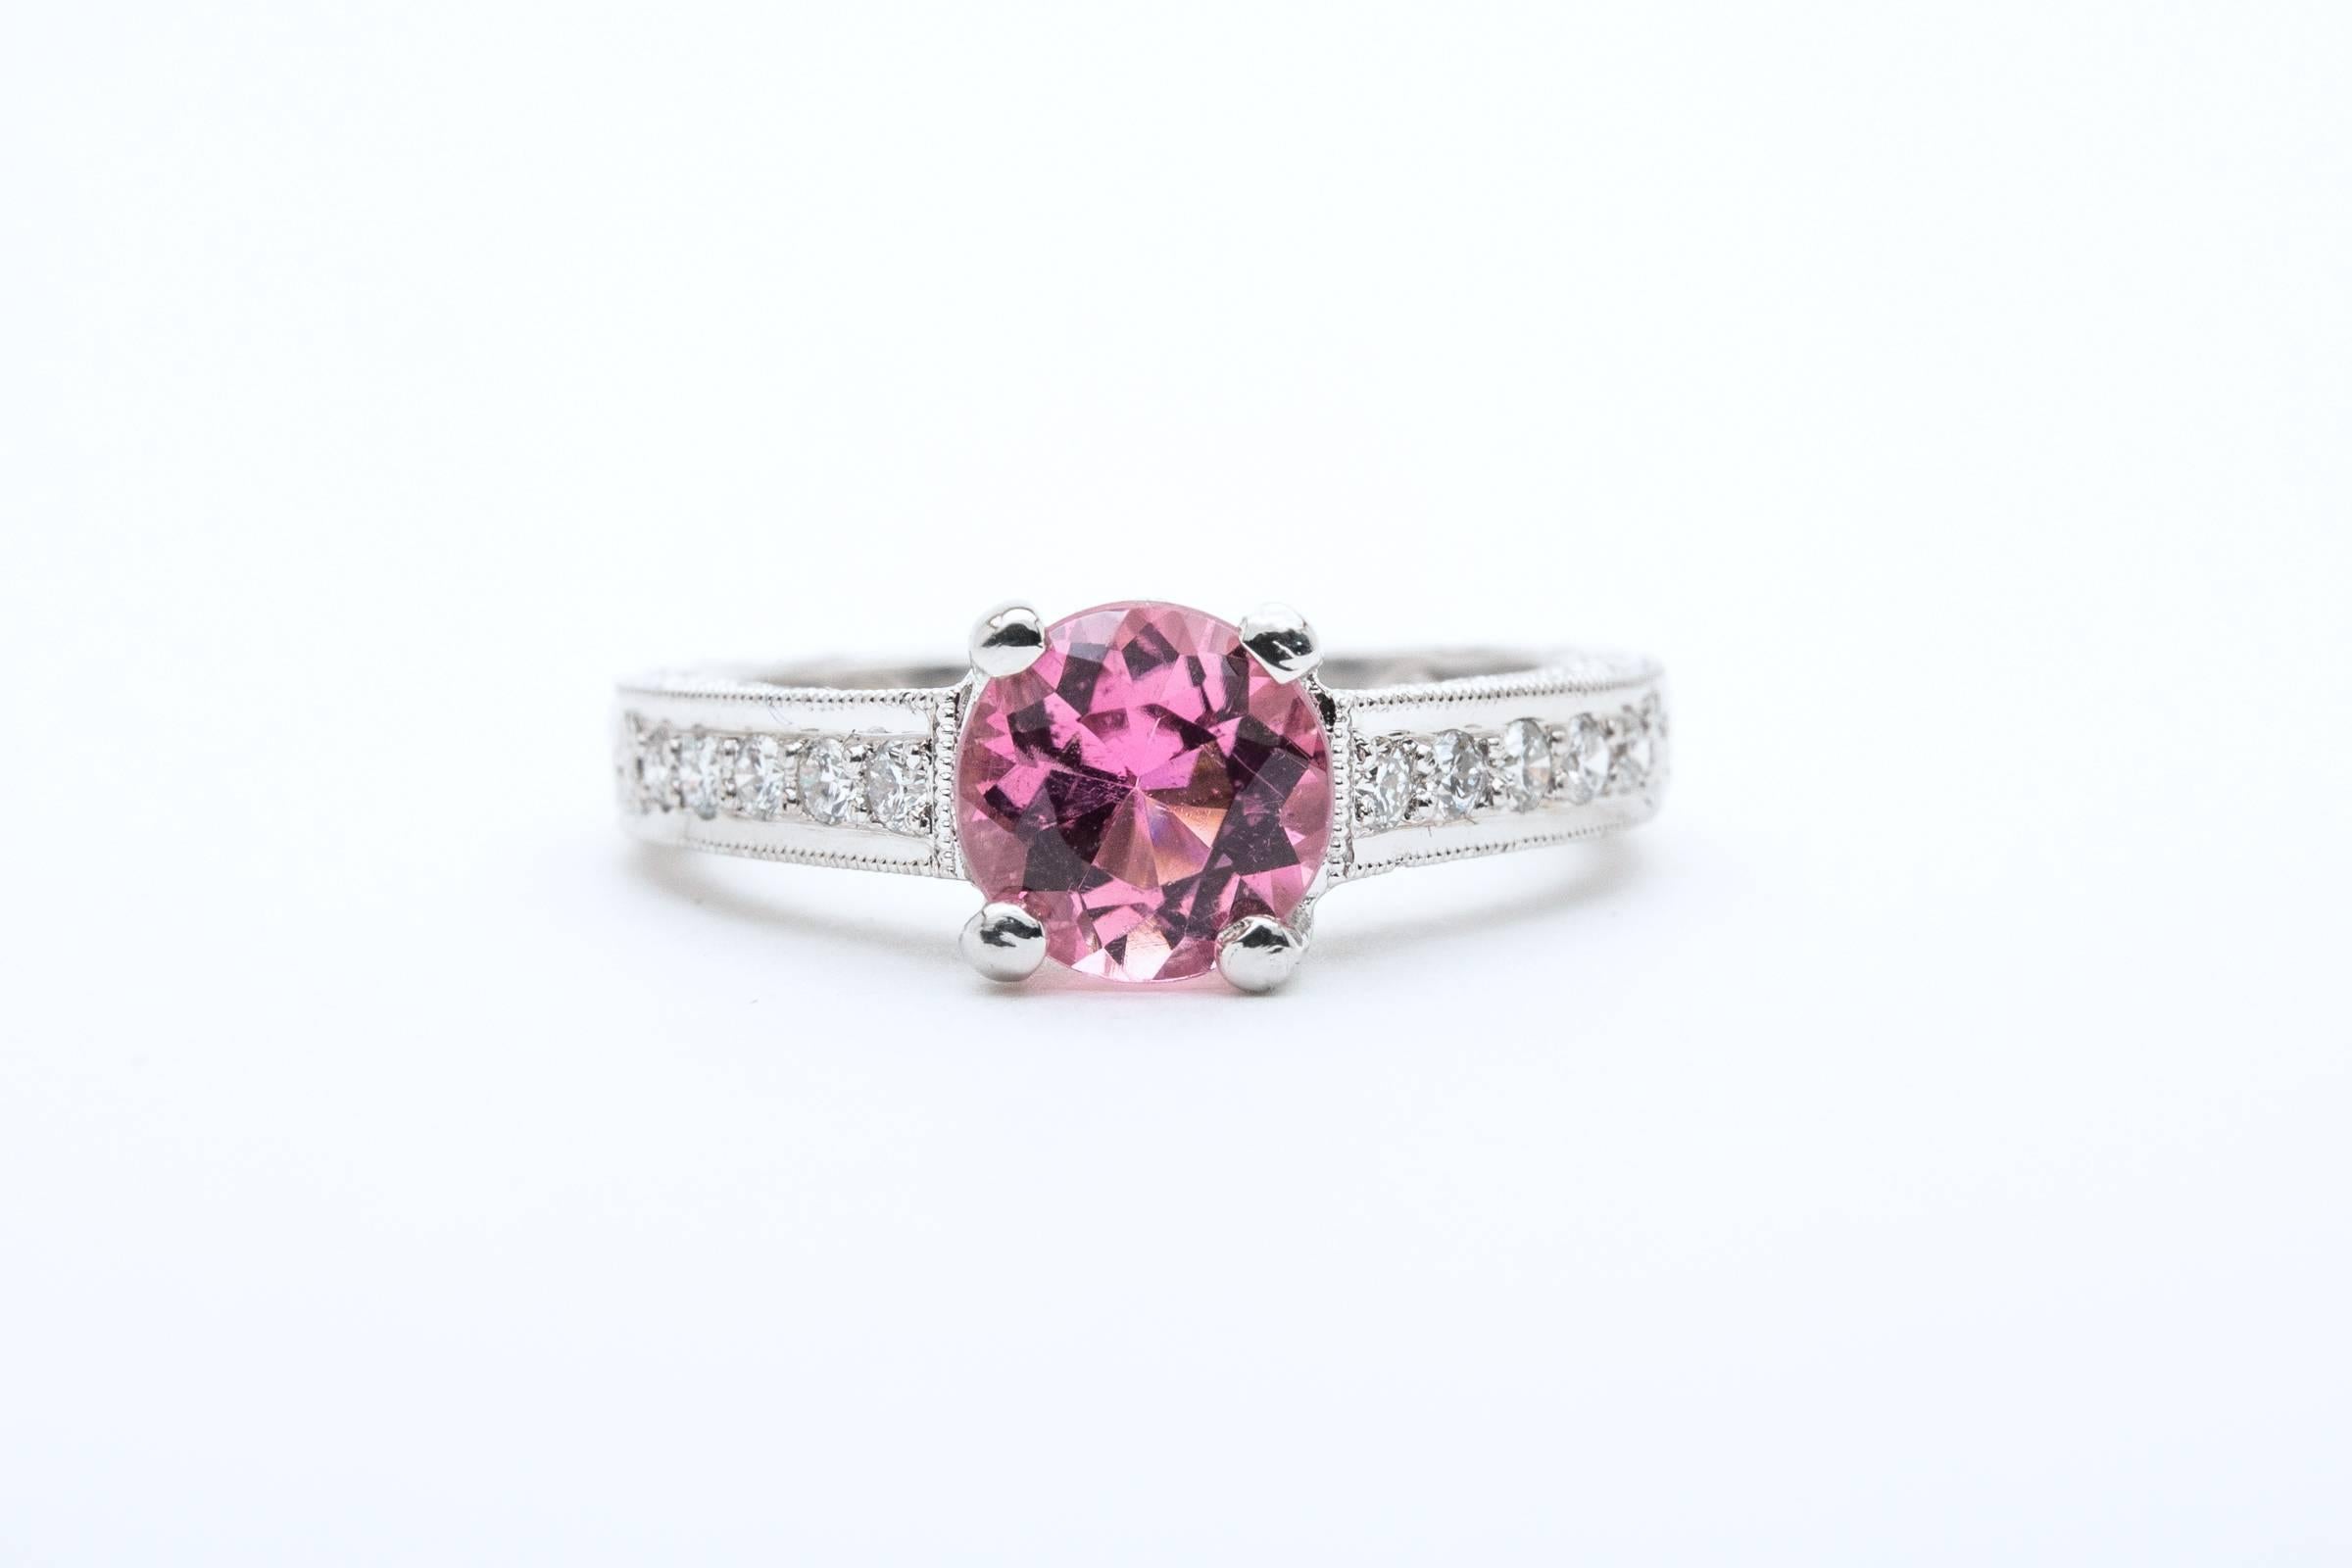 Beacon Hill Jewelers Presents:

A beautiful vintage pink tourmaline and diamond ring in luxurious platinum. Centered by a gorgeous 1.20 carat pink tourmaline of the finest quality, this ring features beautiful hand engraving and hand pierced hearts